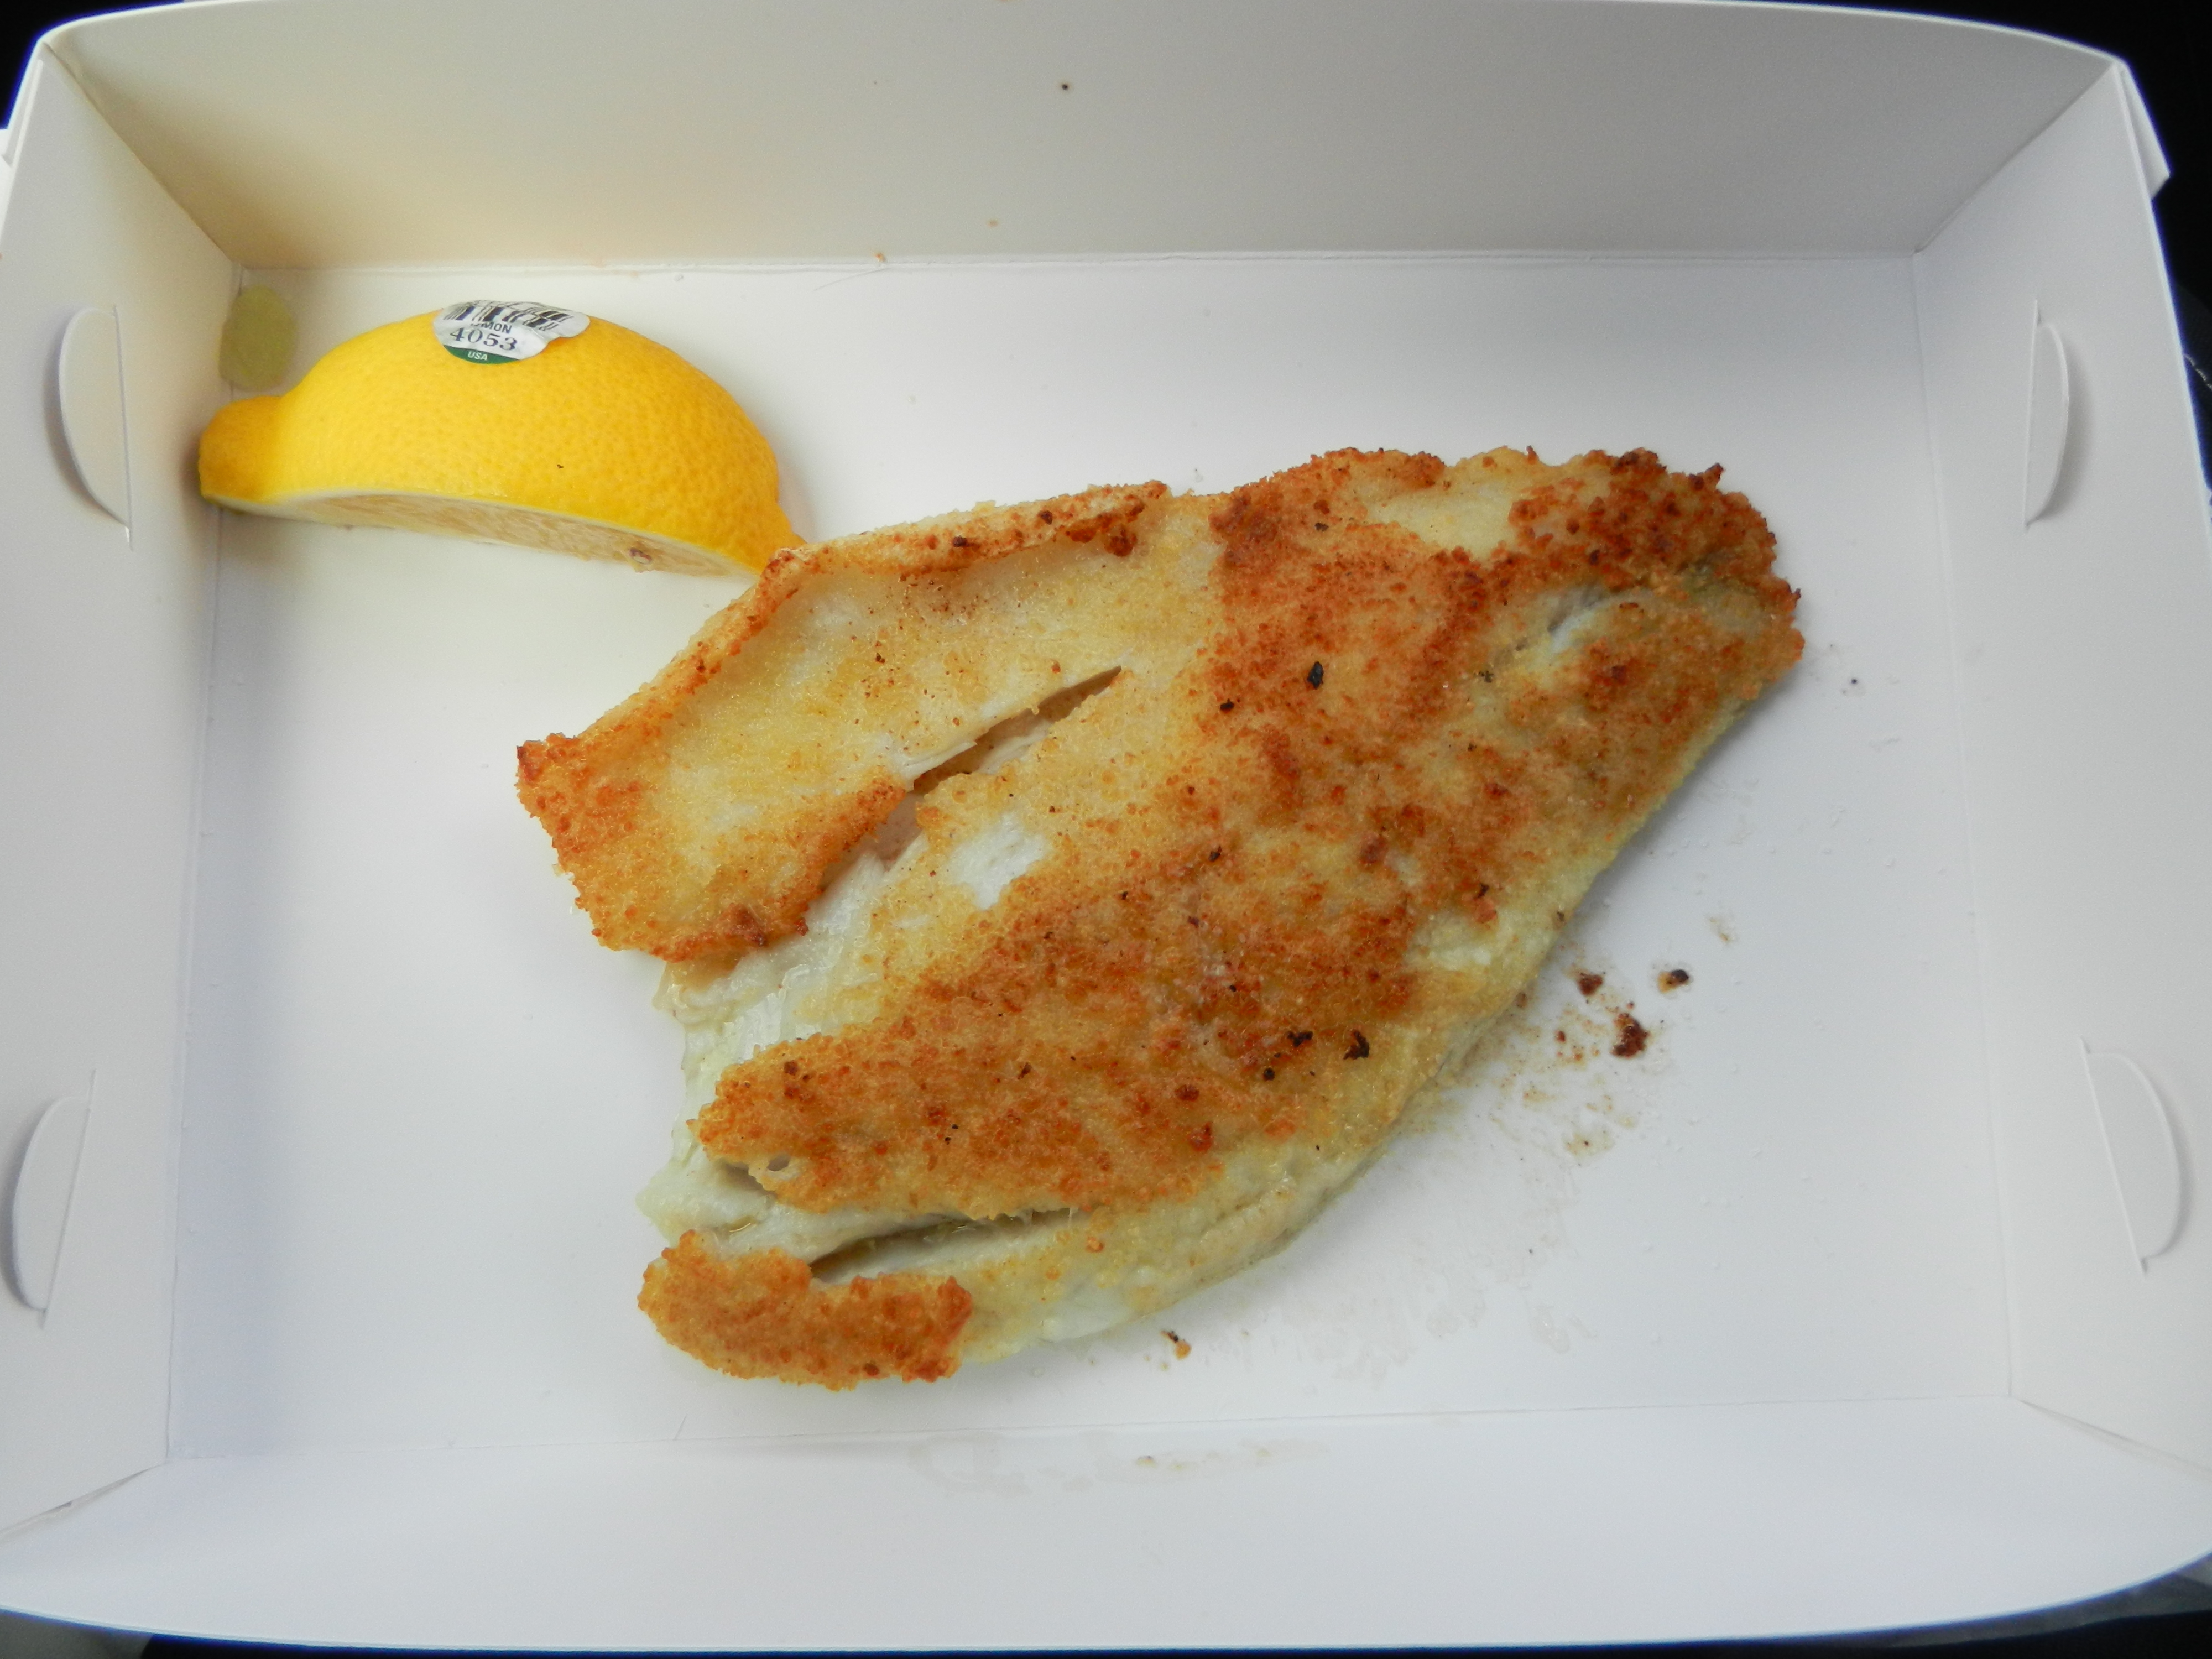 Breaded fish with a lemon wedge inside a white cardboard dish.